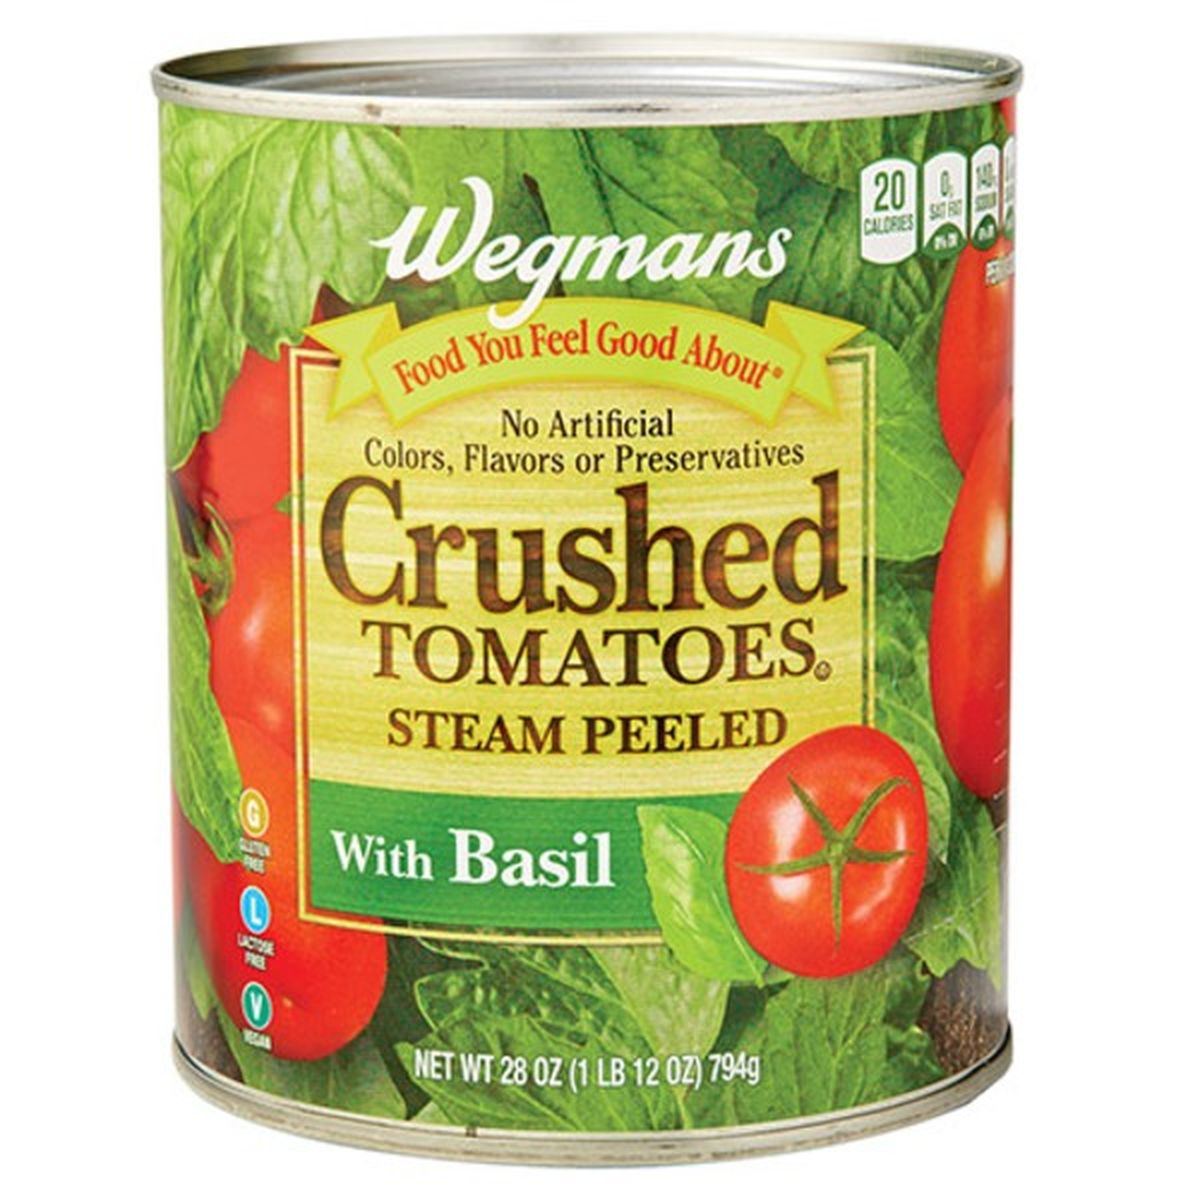 Calories in Wegmans Crushed Tomatoes with Basil